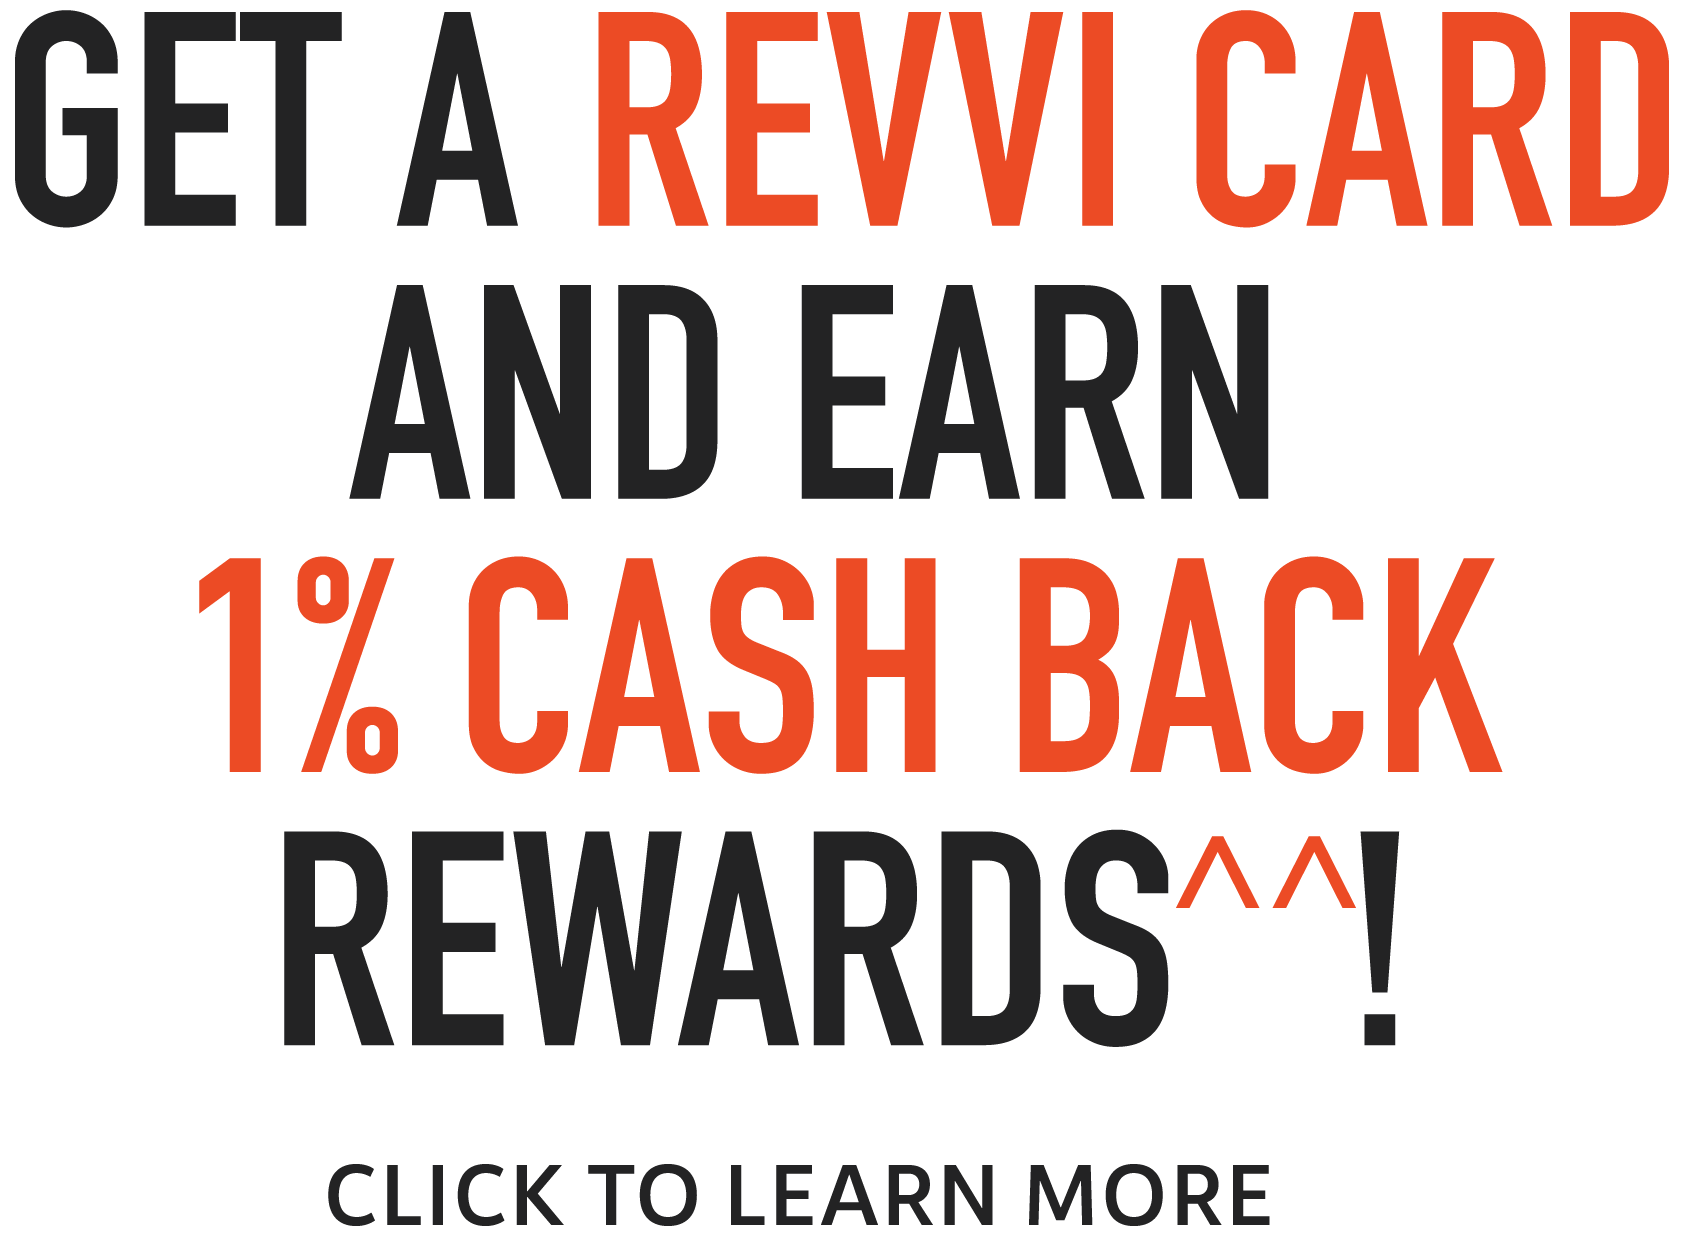 Revvi Rewards Offer 1% Cashback on Payments � See Terms and Conditions for Details